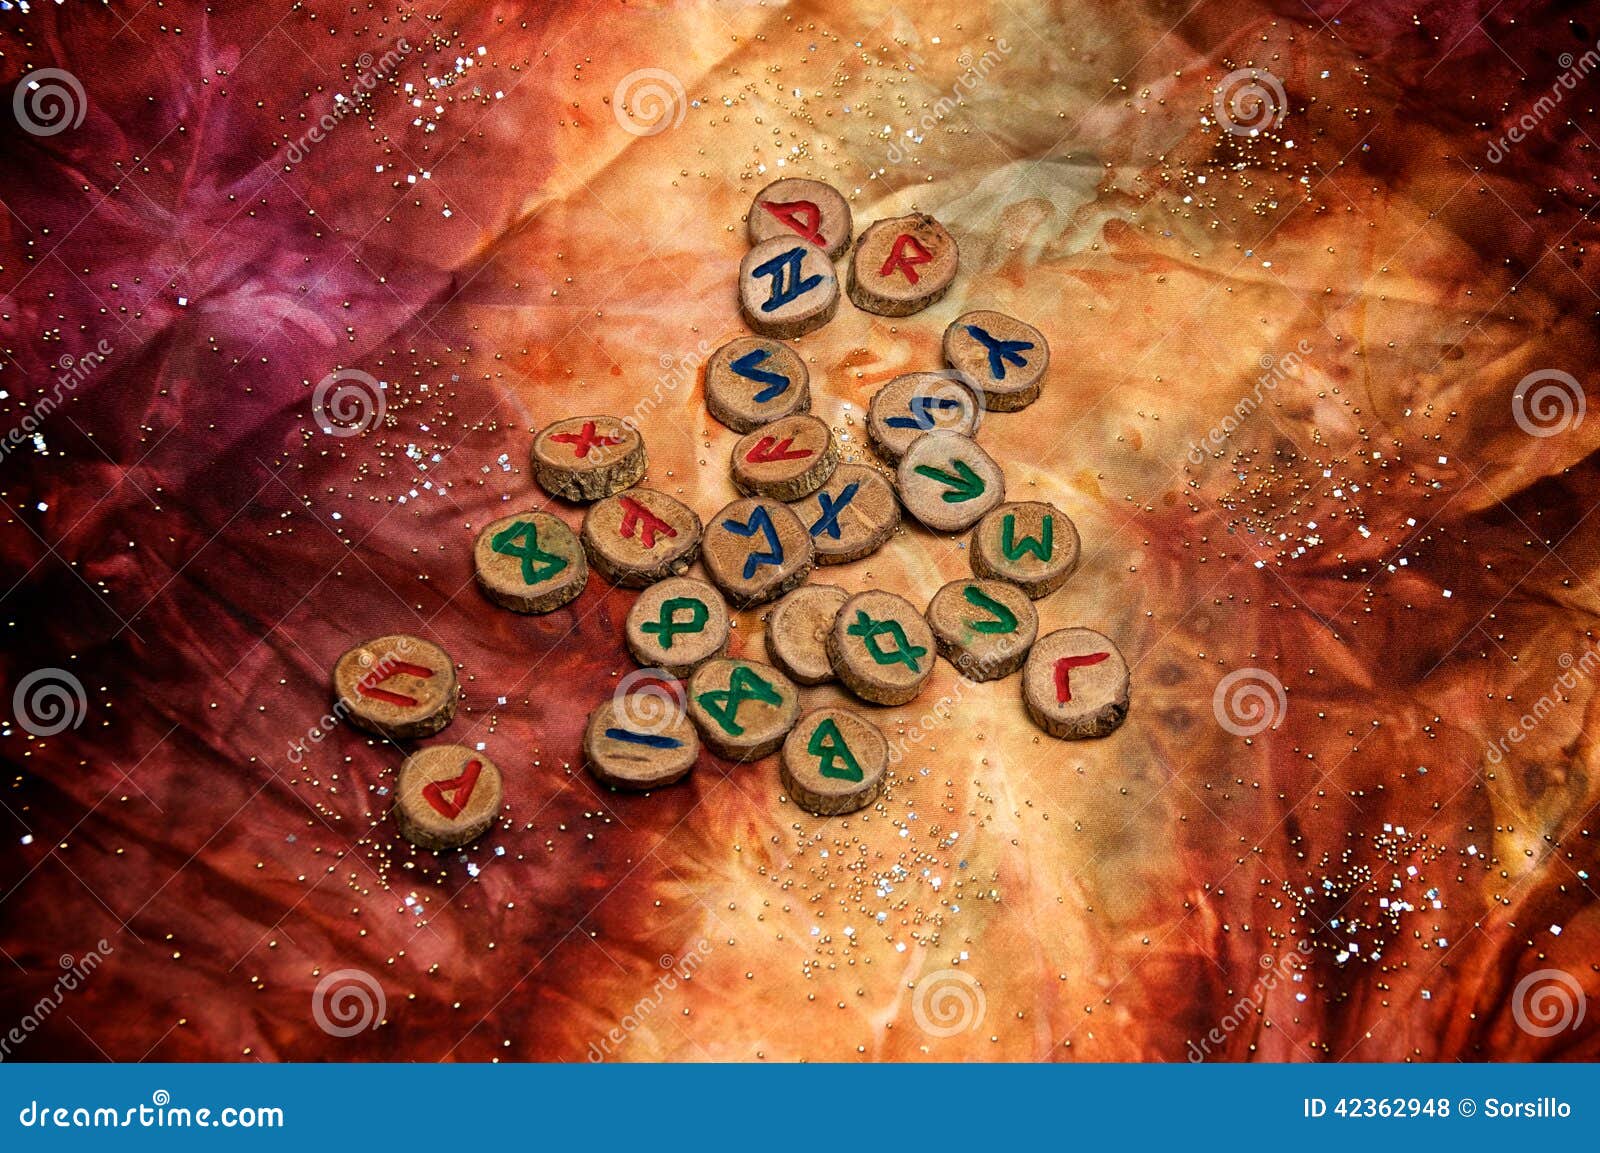 wooden viking runes on colorful mystical cloth